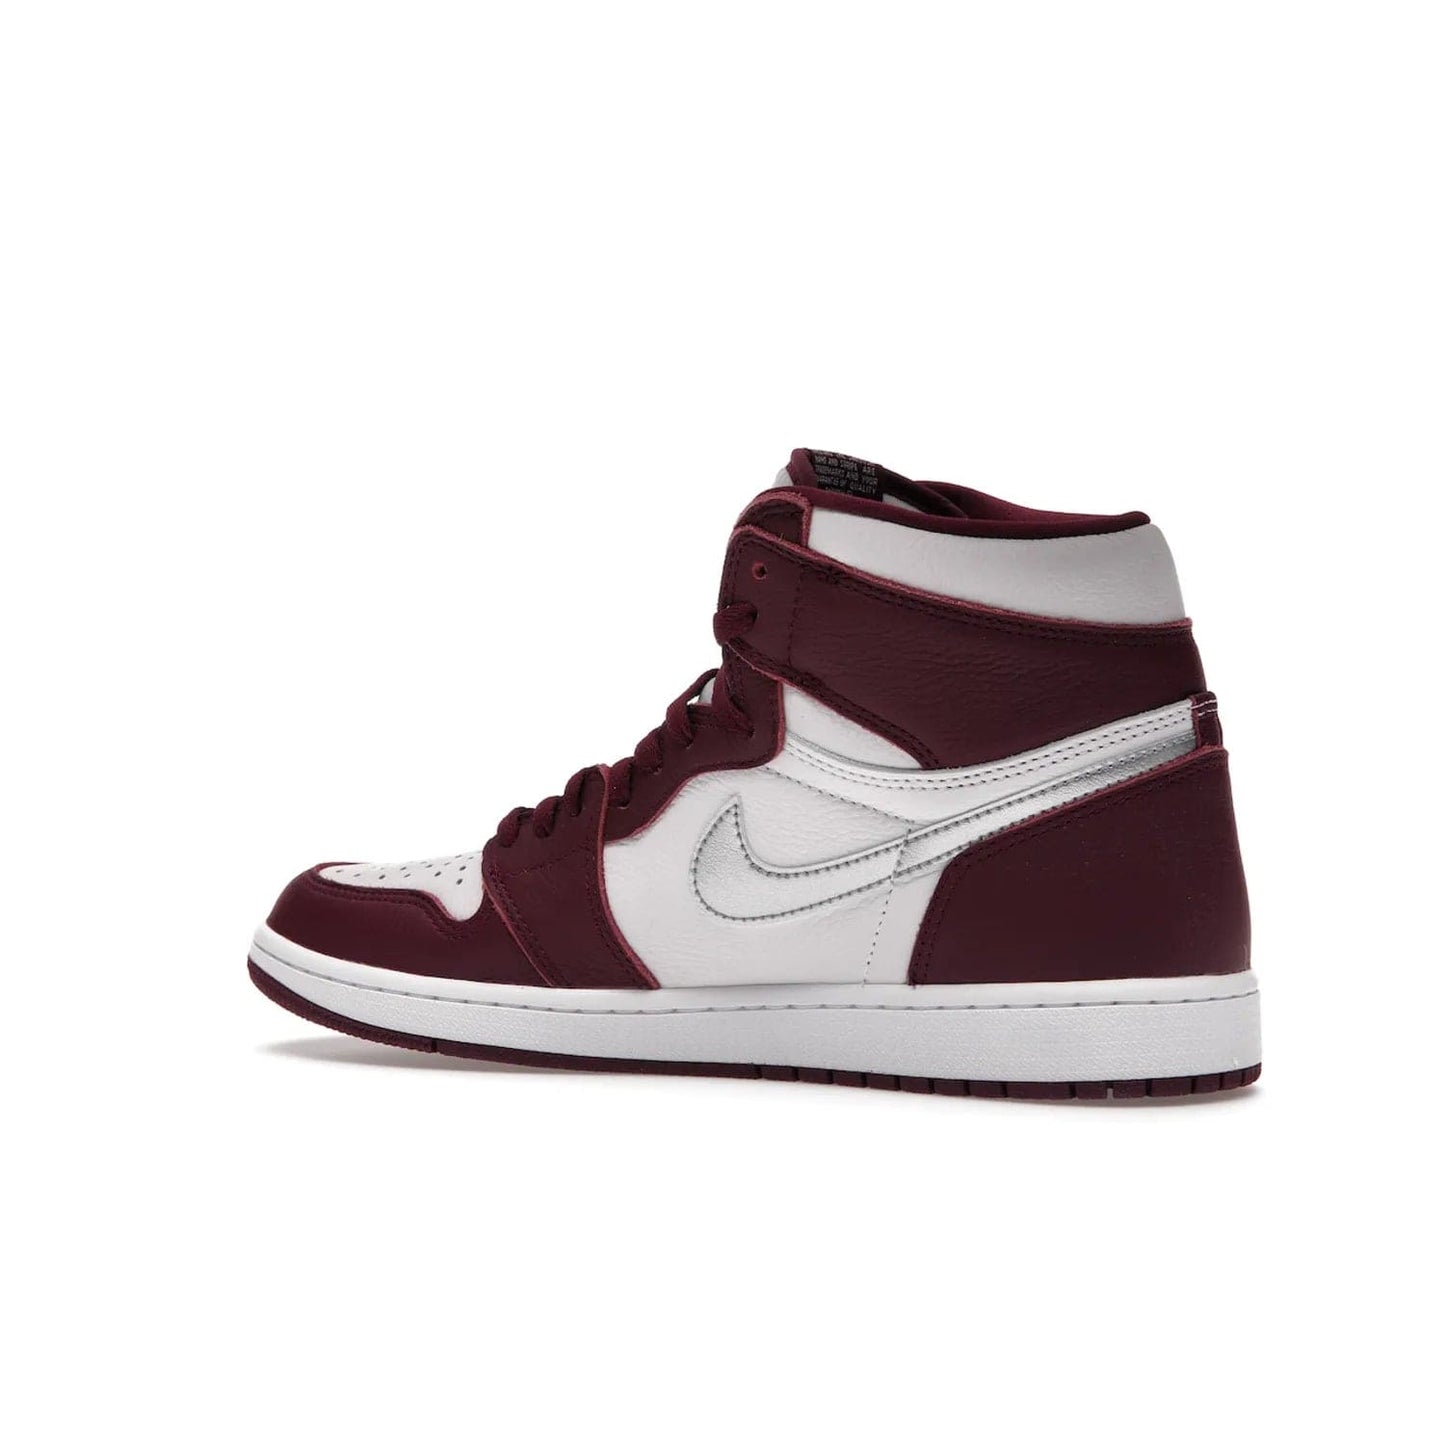 Jordan 1 Retro High OG Bordeaux - Image 22 - Only at www.BallersClubKickz.com - Shop the classic Air Jordan 1 High Bordeaux with a modern high-top cut. The timeless Bordeaux and White-Metallic Silver colorway, releasing Nov 20, 2021, is perfect for practice or a night out.